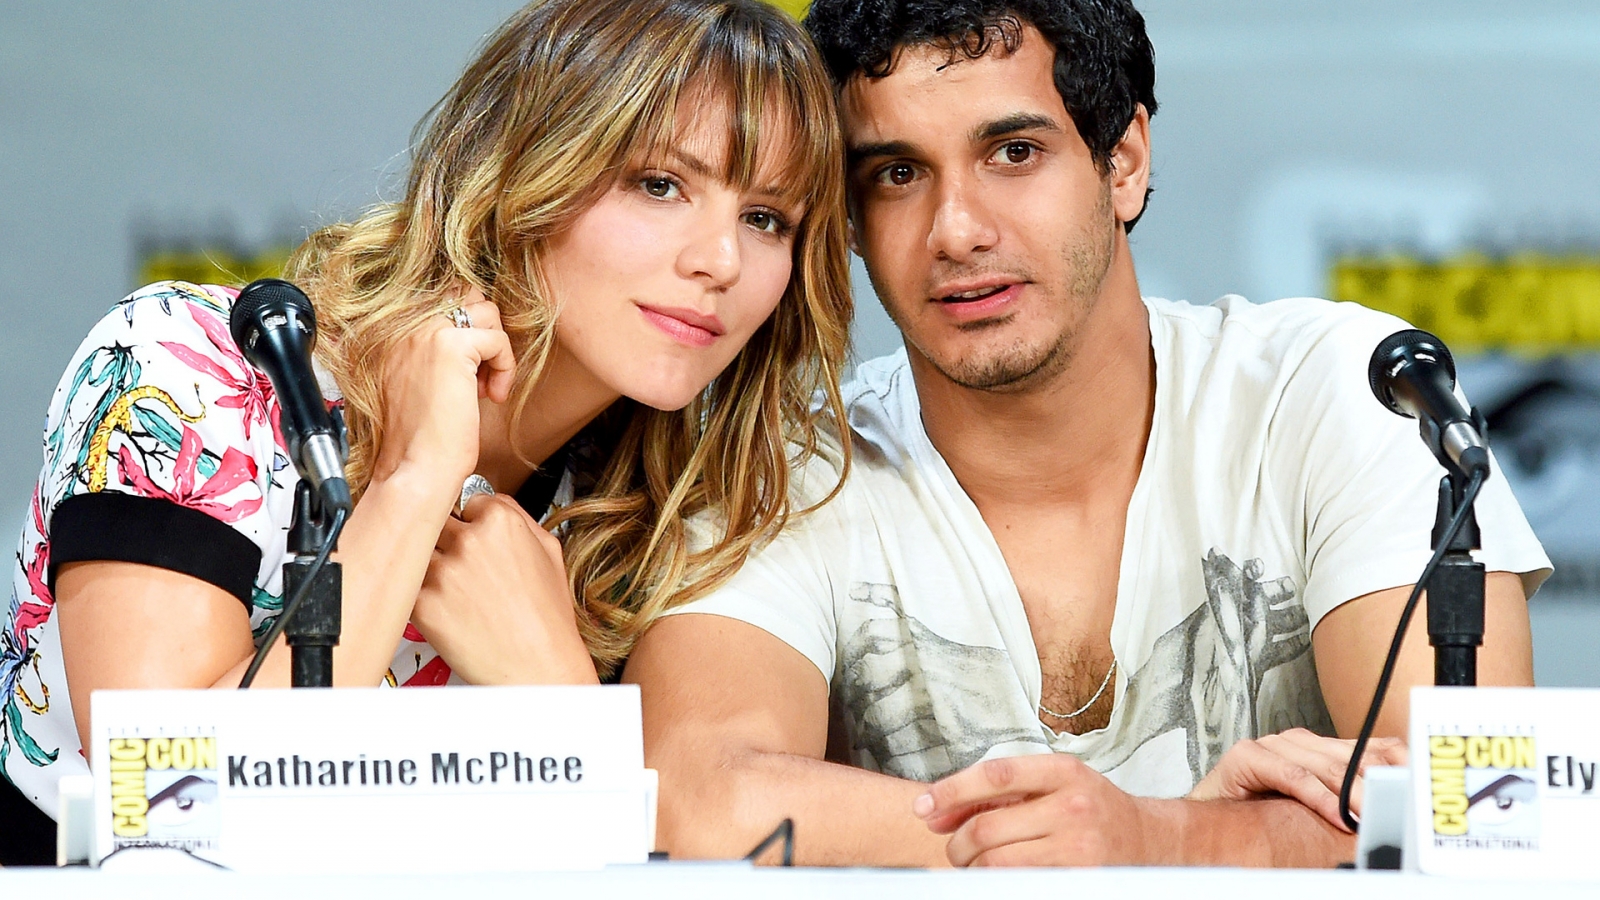 Katharine McPhee and Elyes Gabel for 1600 x 900 HDTV resolution